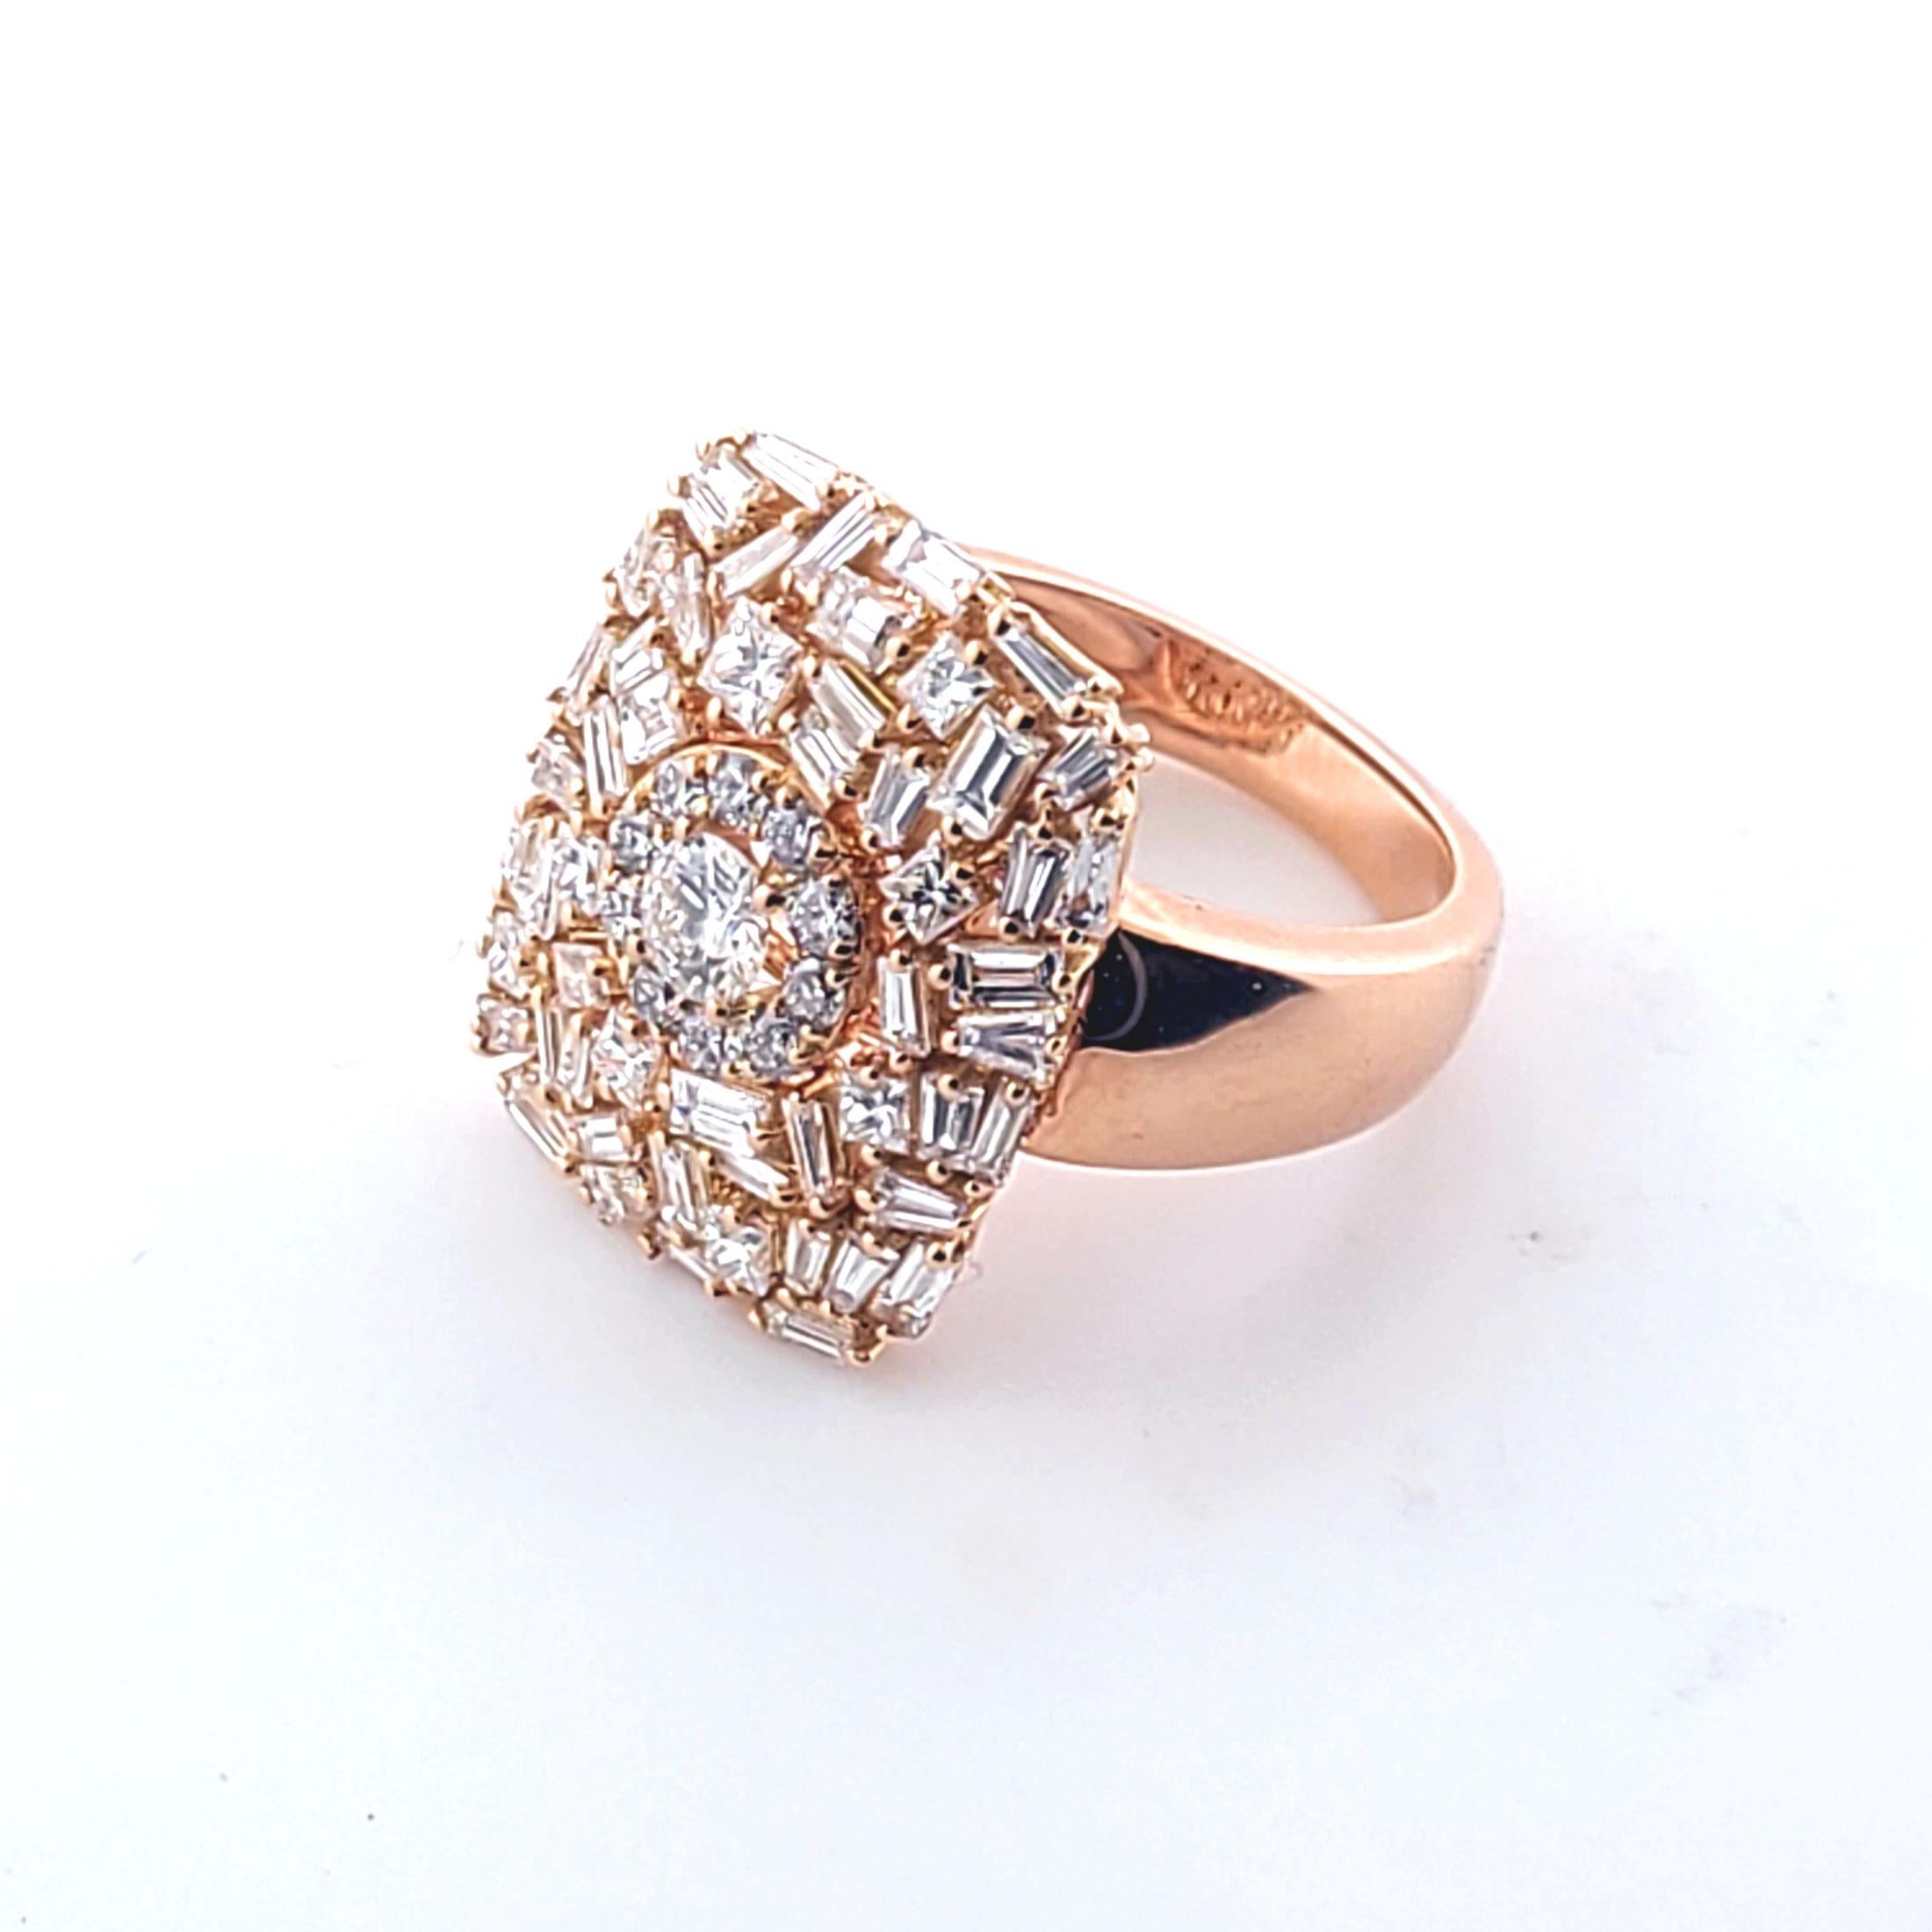 This 18k rose gold ring is has baguette, princess cut and round brilliant diamonds. The diamonds of which 1.25cts of baguettes, 0.38cts of princess cut and 0.50cts of round brilliant natural diamonds. The color and the clarity of the diamonds are